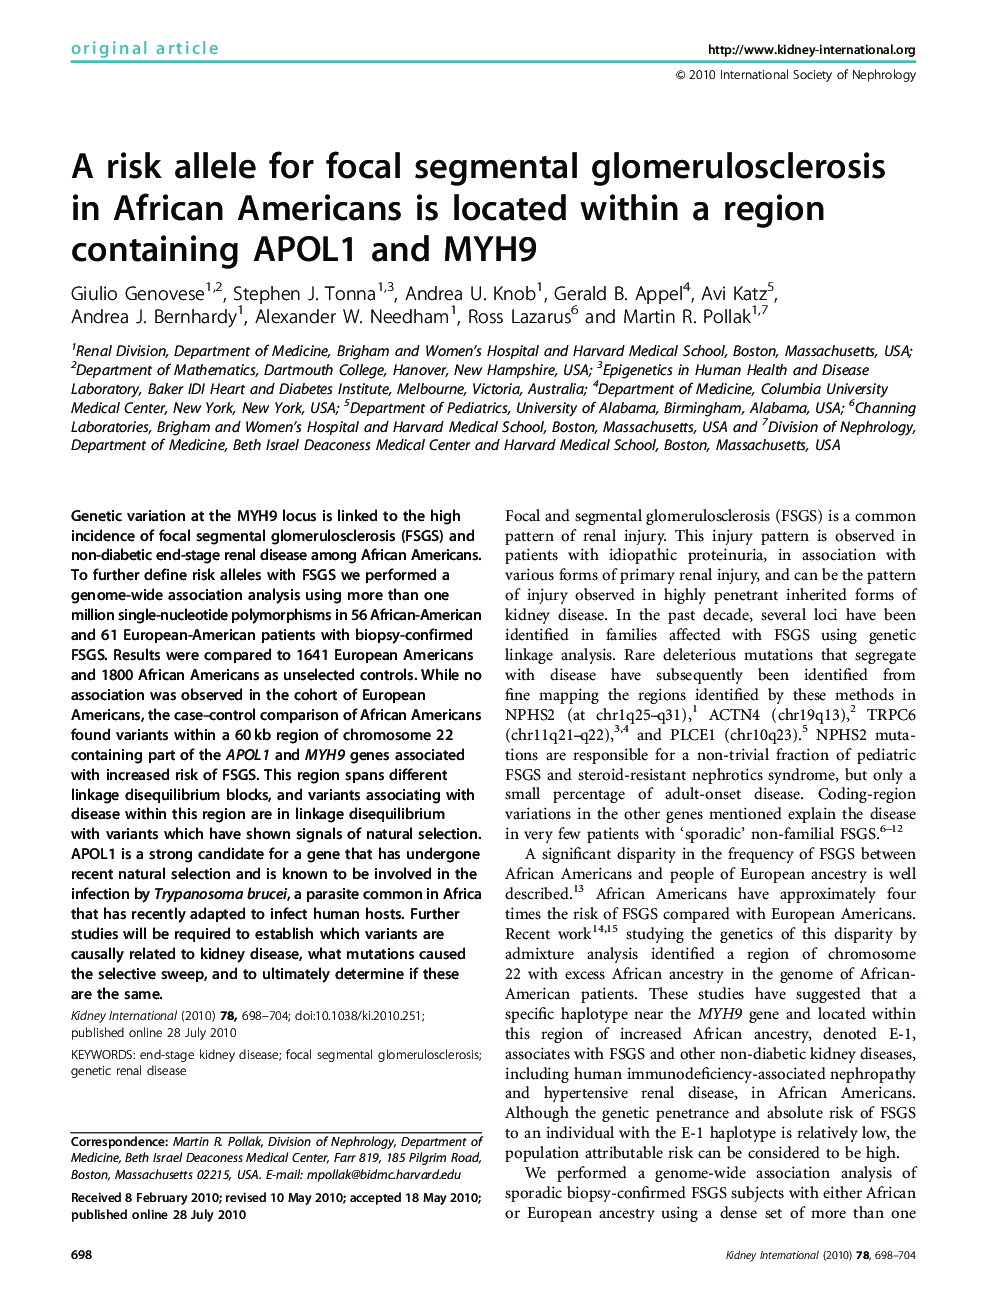 A risk allele for focal segmental glomerulosclerosis in African Americans is located within a region containing APOL1 and MYH9 